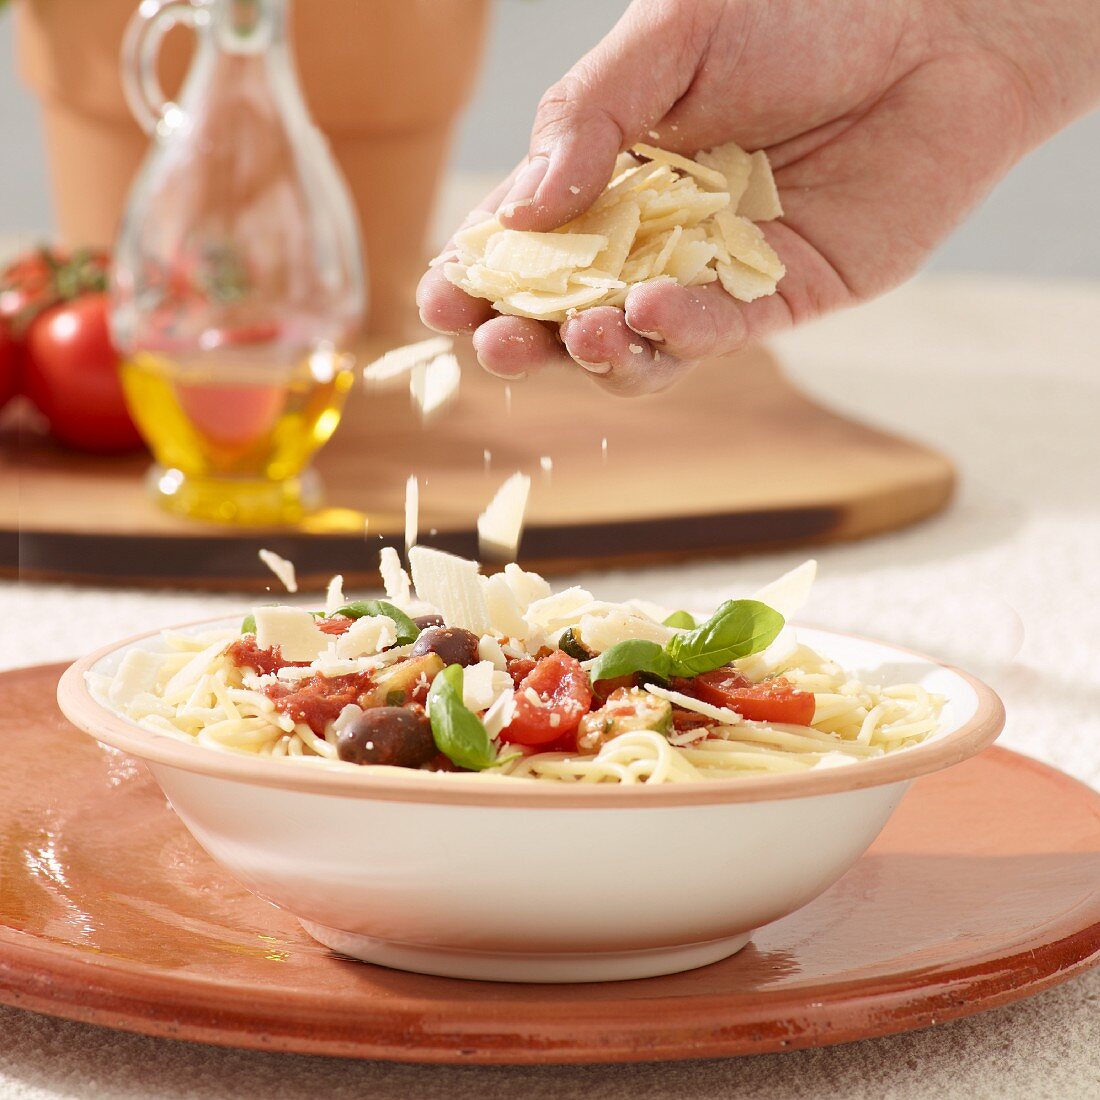 A spaghetti dish being sprinkled with parmesan